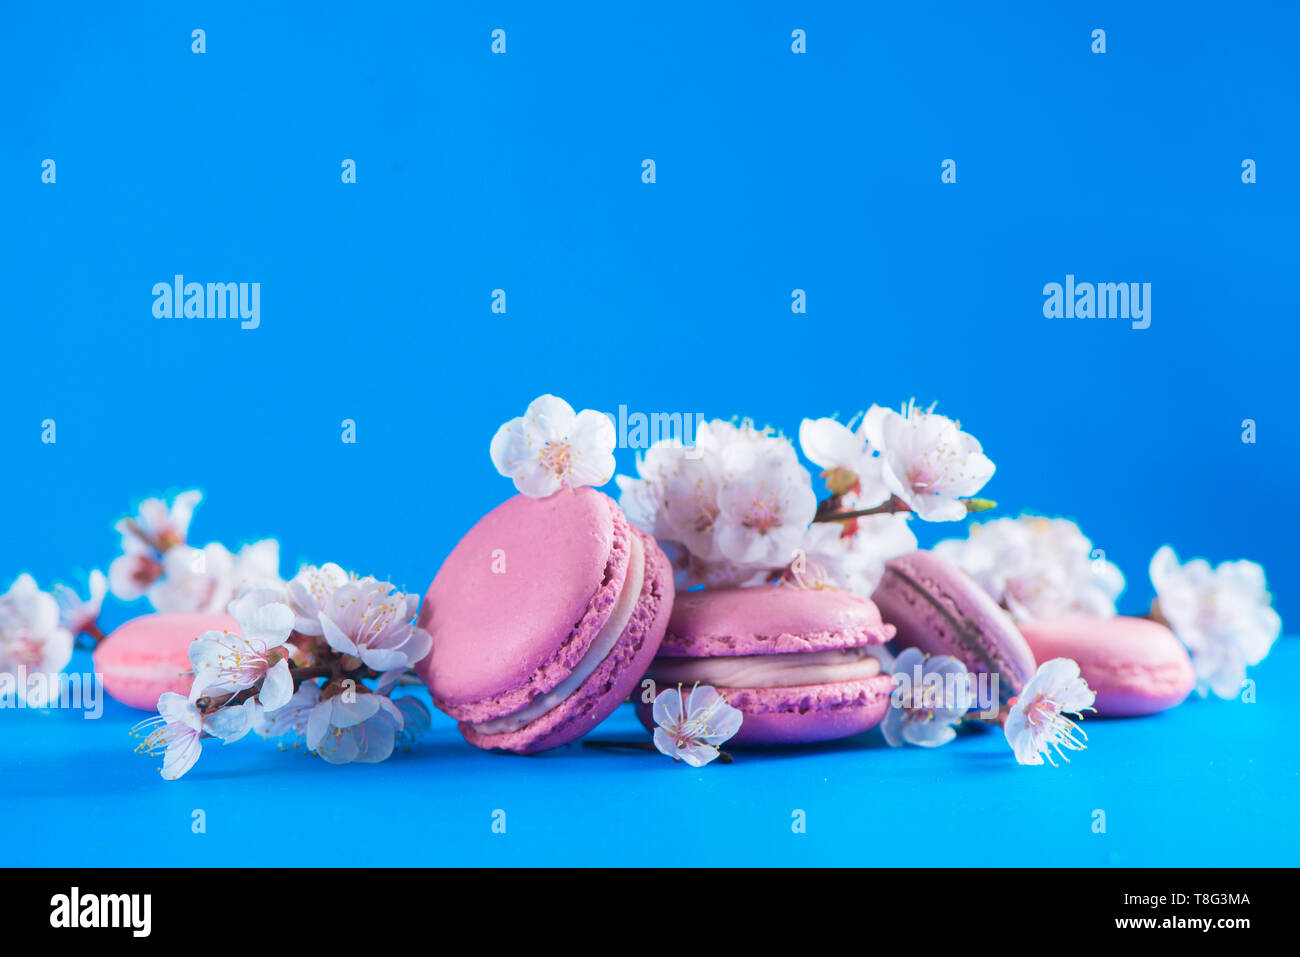 French macaron cookies header with cherry blossom flowers on a sky blue background with copy space. Color pop Stock Photo